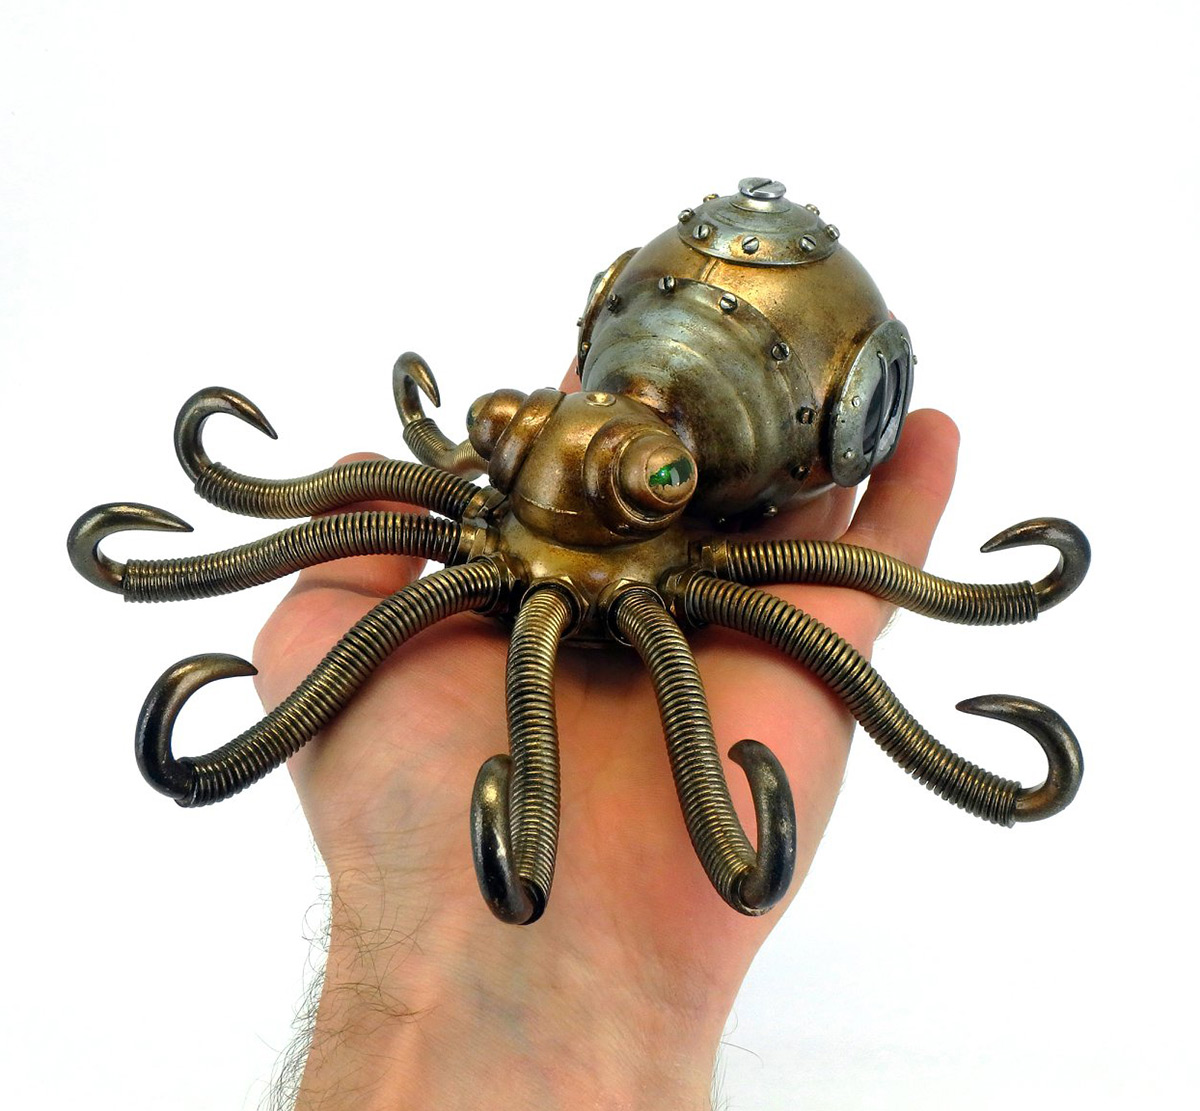 Intricate Steampunk Creatures By Igor Verny (15)